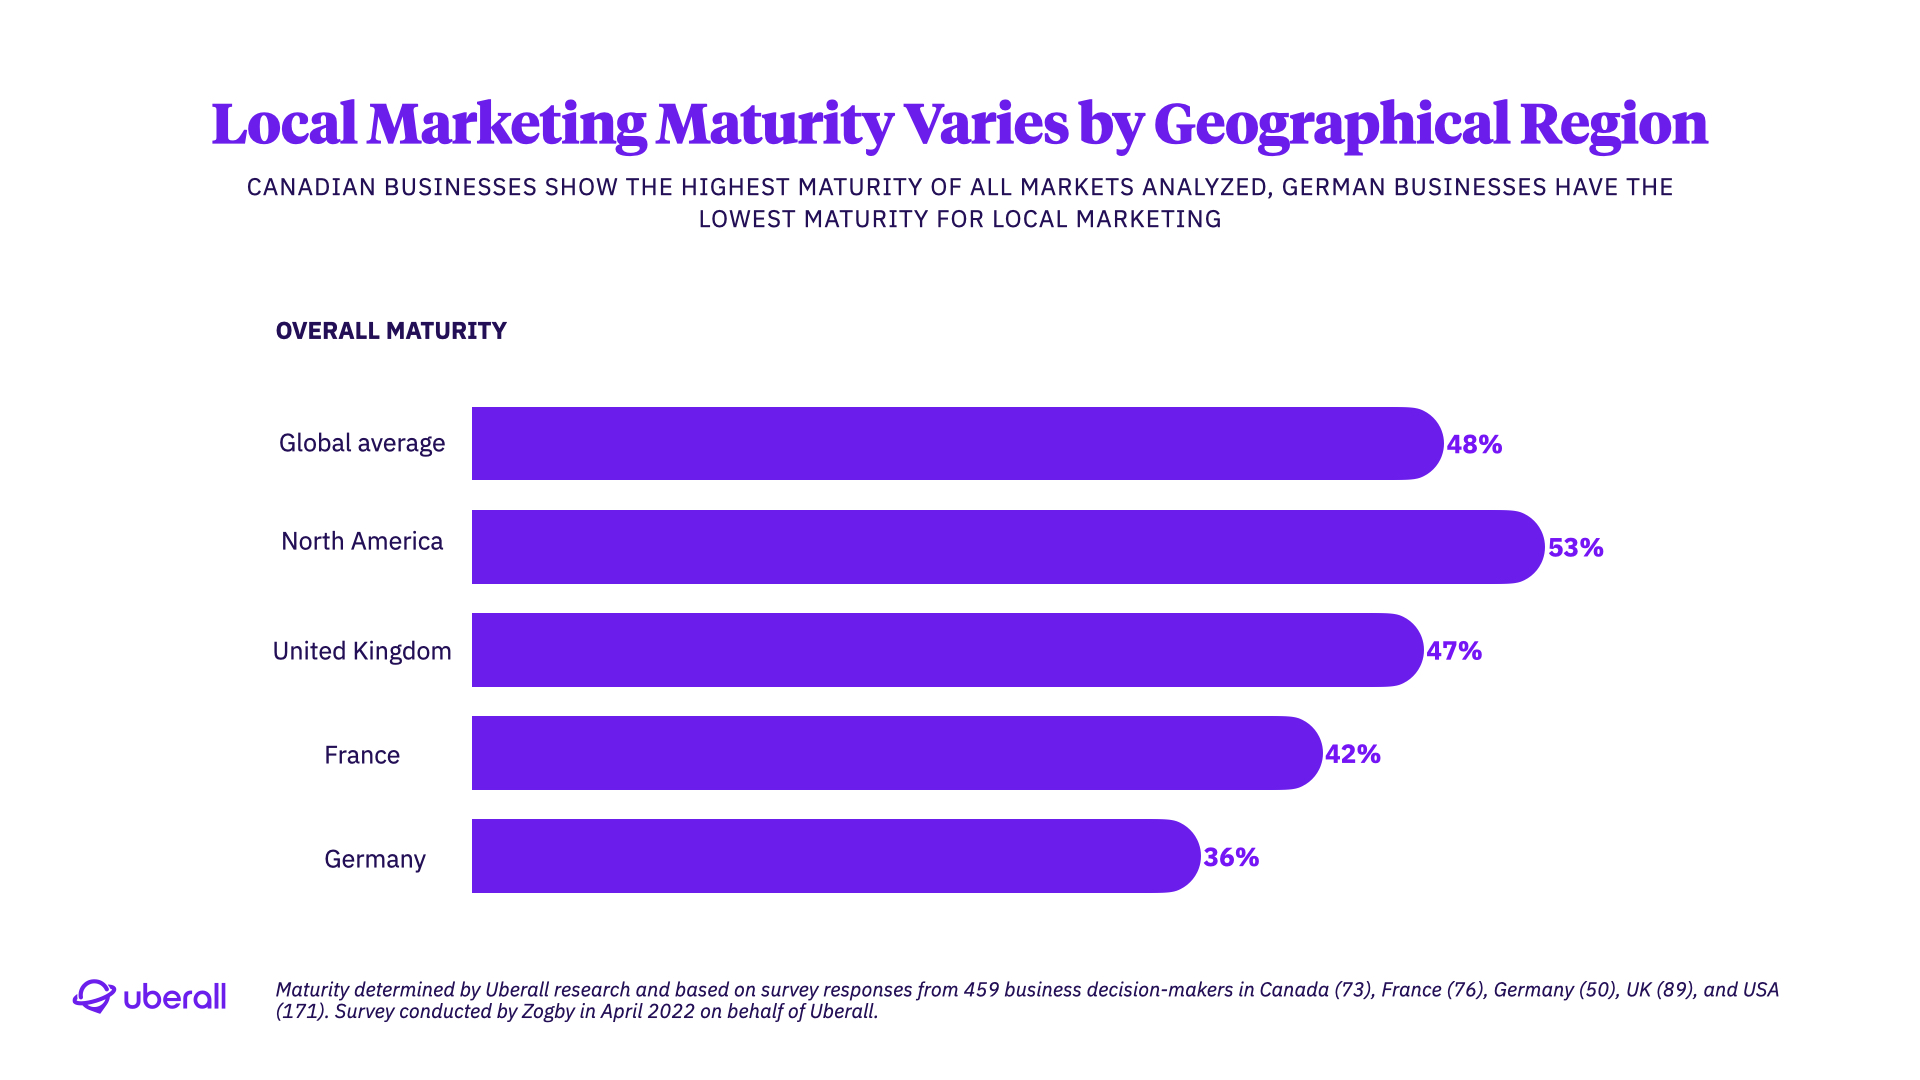 Local marketing maturity varies by geographical region